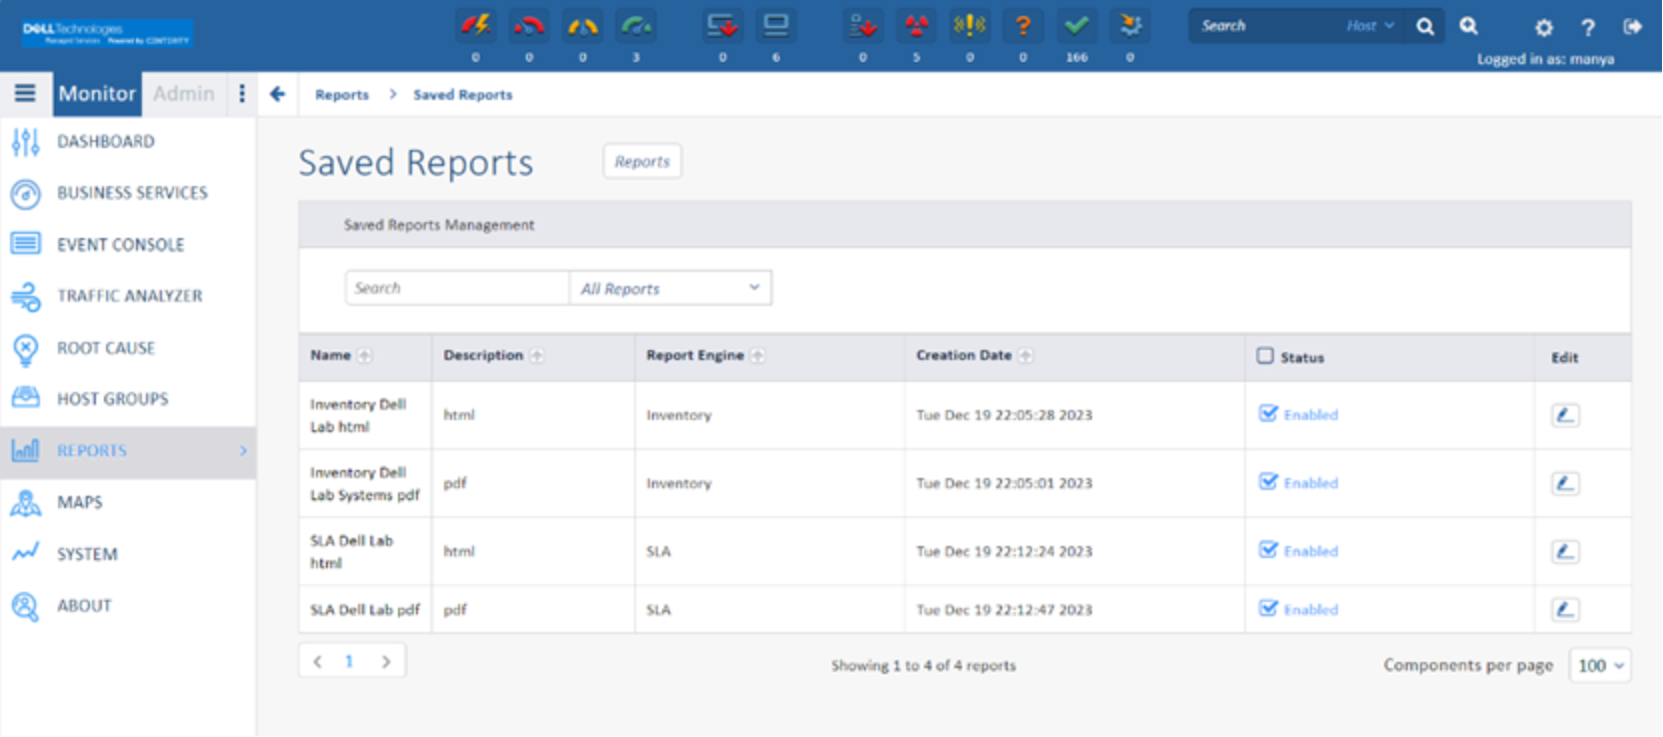 Centerity Dashboard showing how Reports can be saved and shared